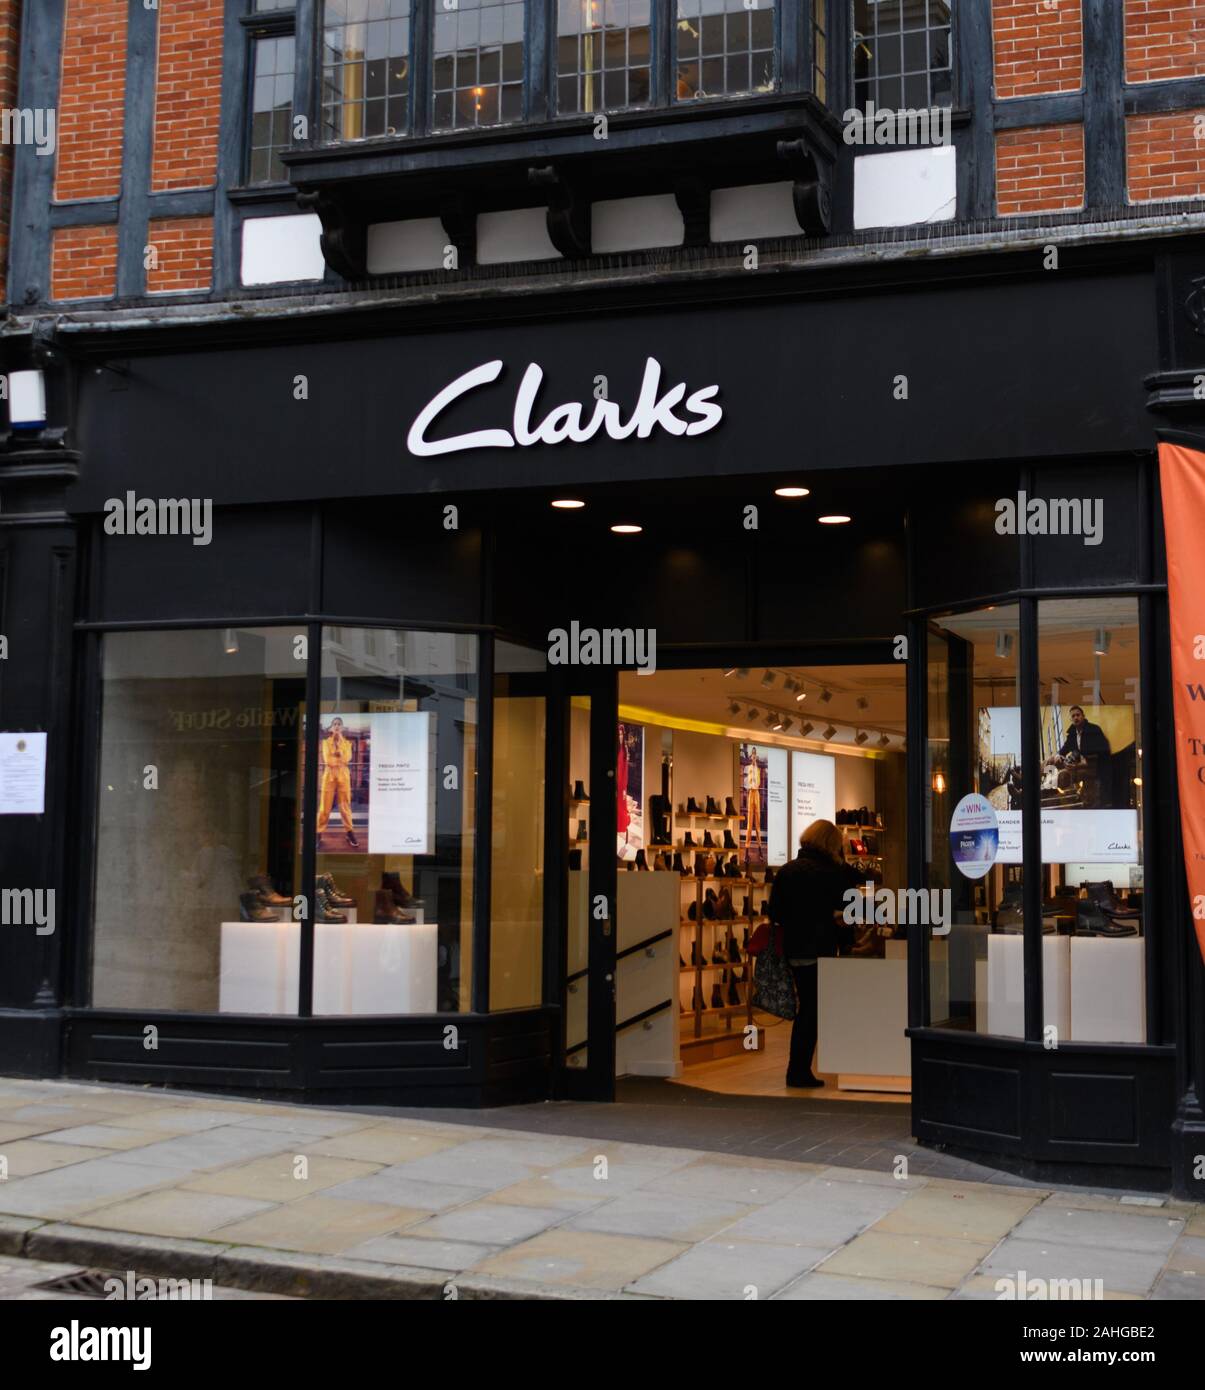 Frontage of Clarks shoe shop 